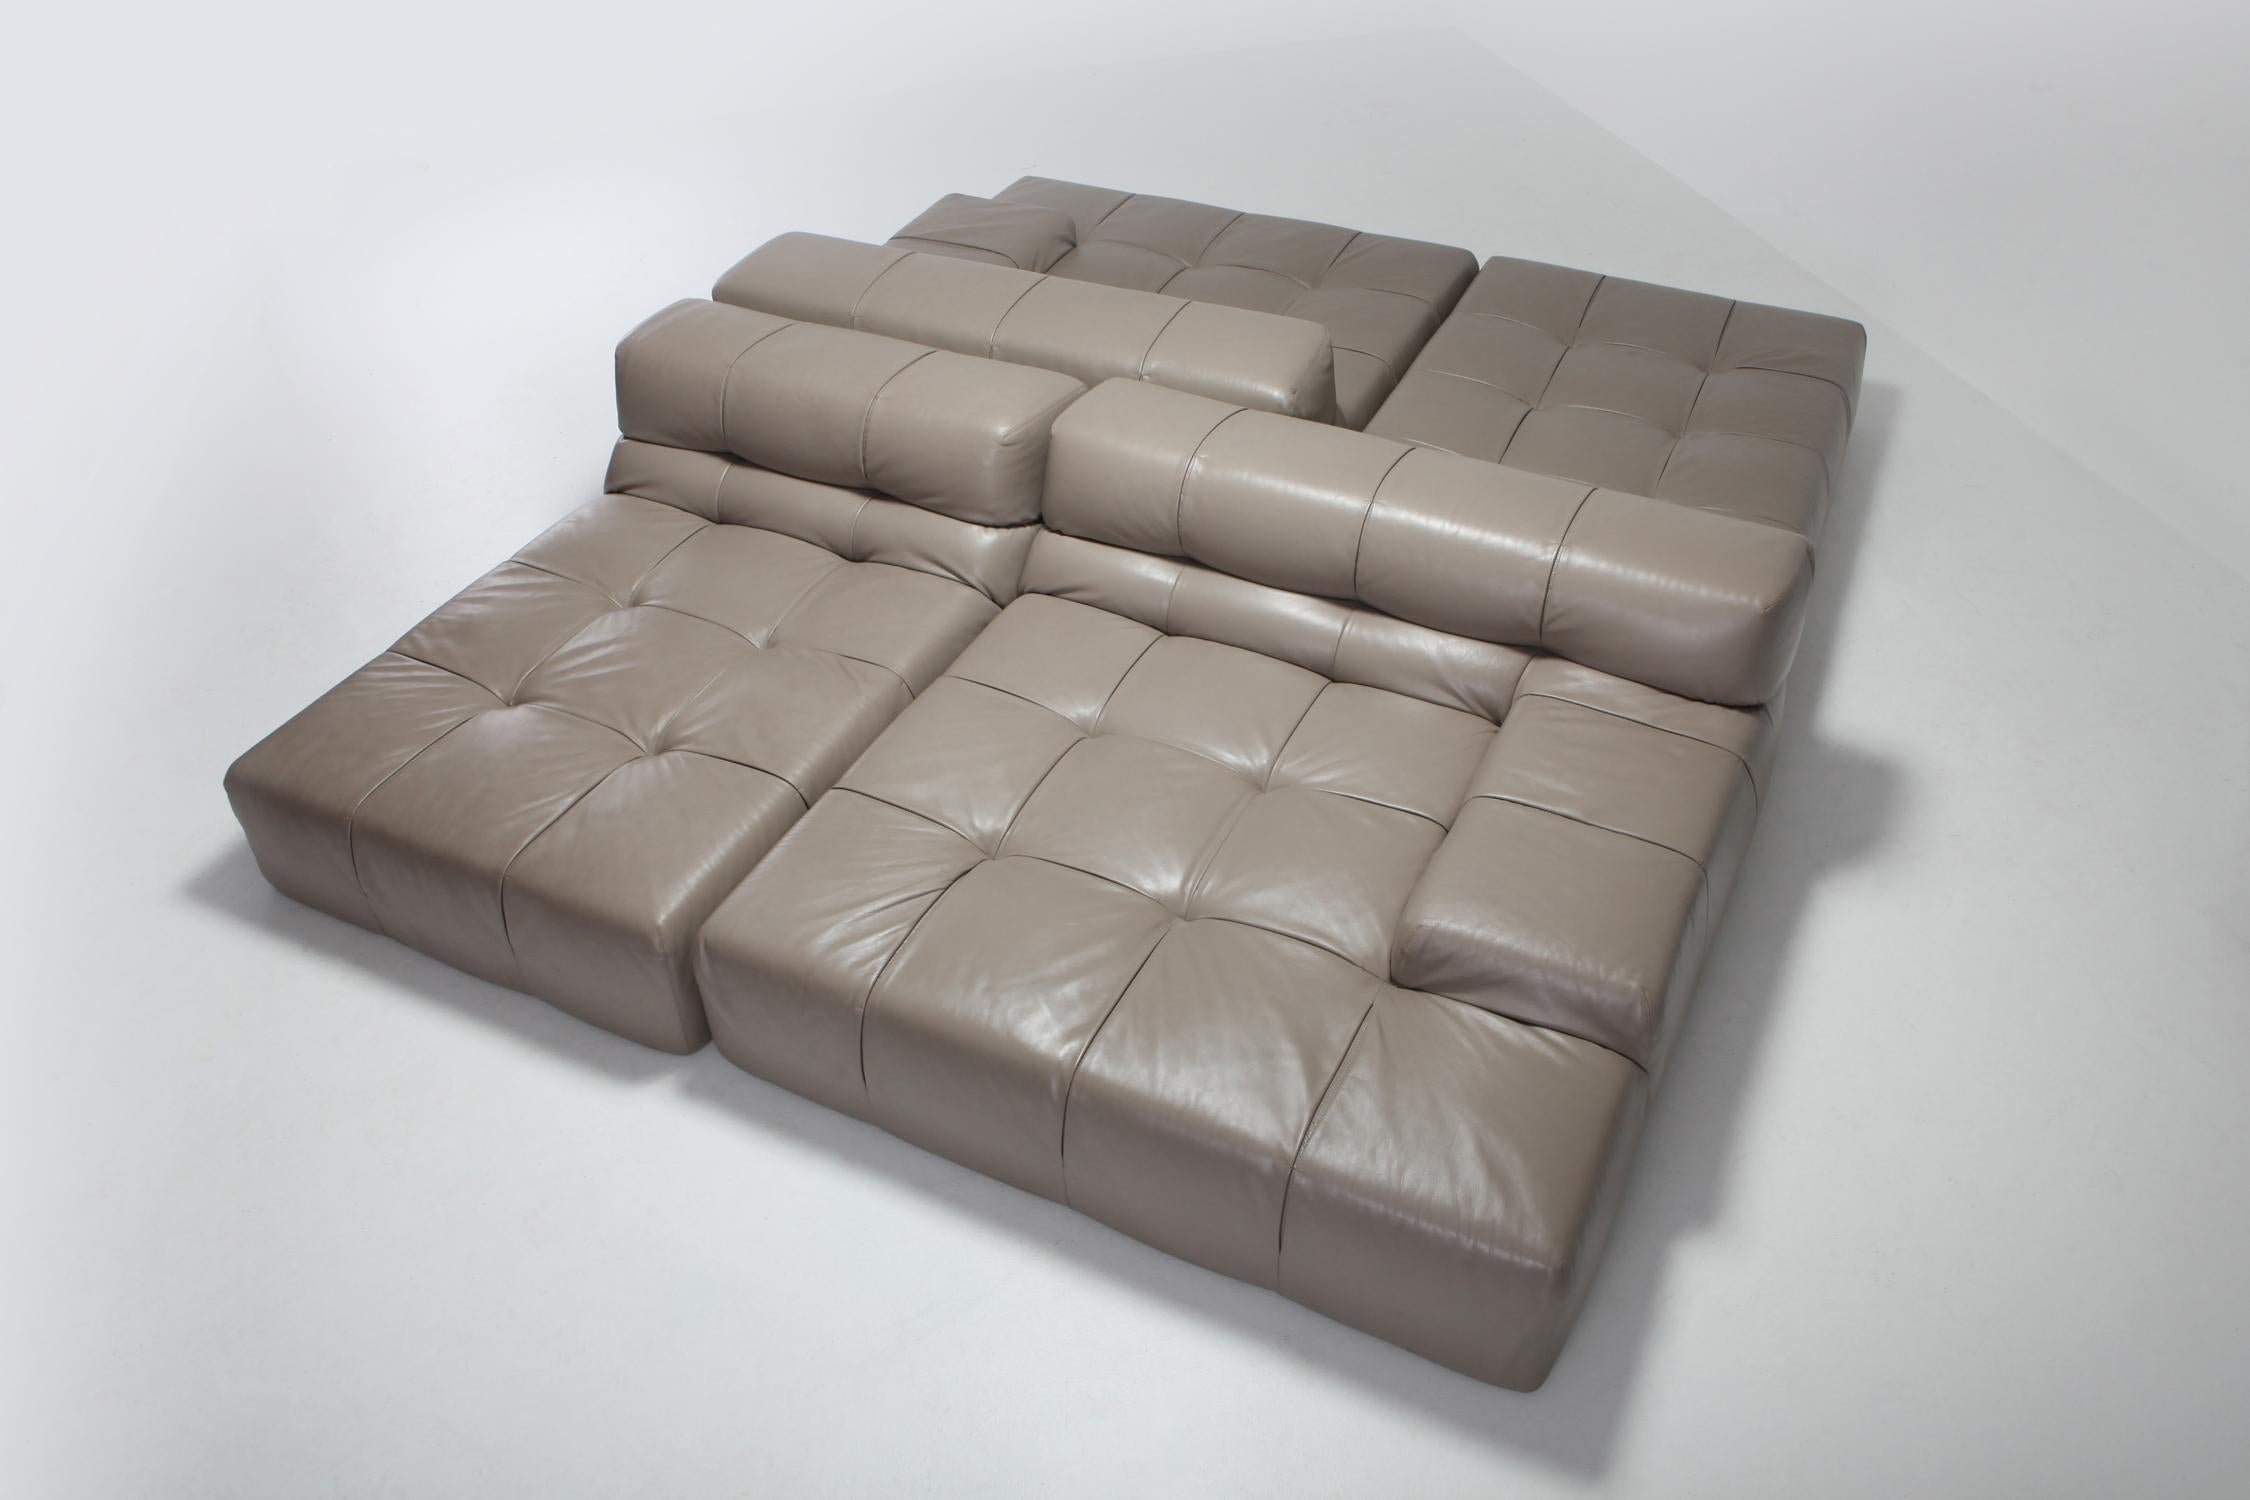 Contemporary Tufty Time B&B Italia Taupe Leather Sectional Sofa by Patricia Urquiola